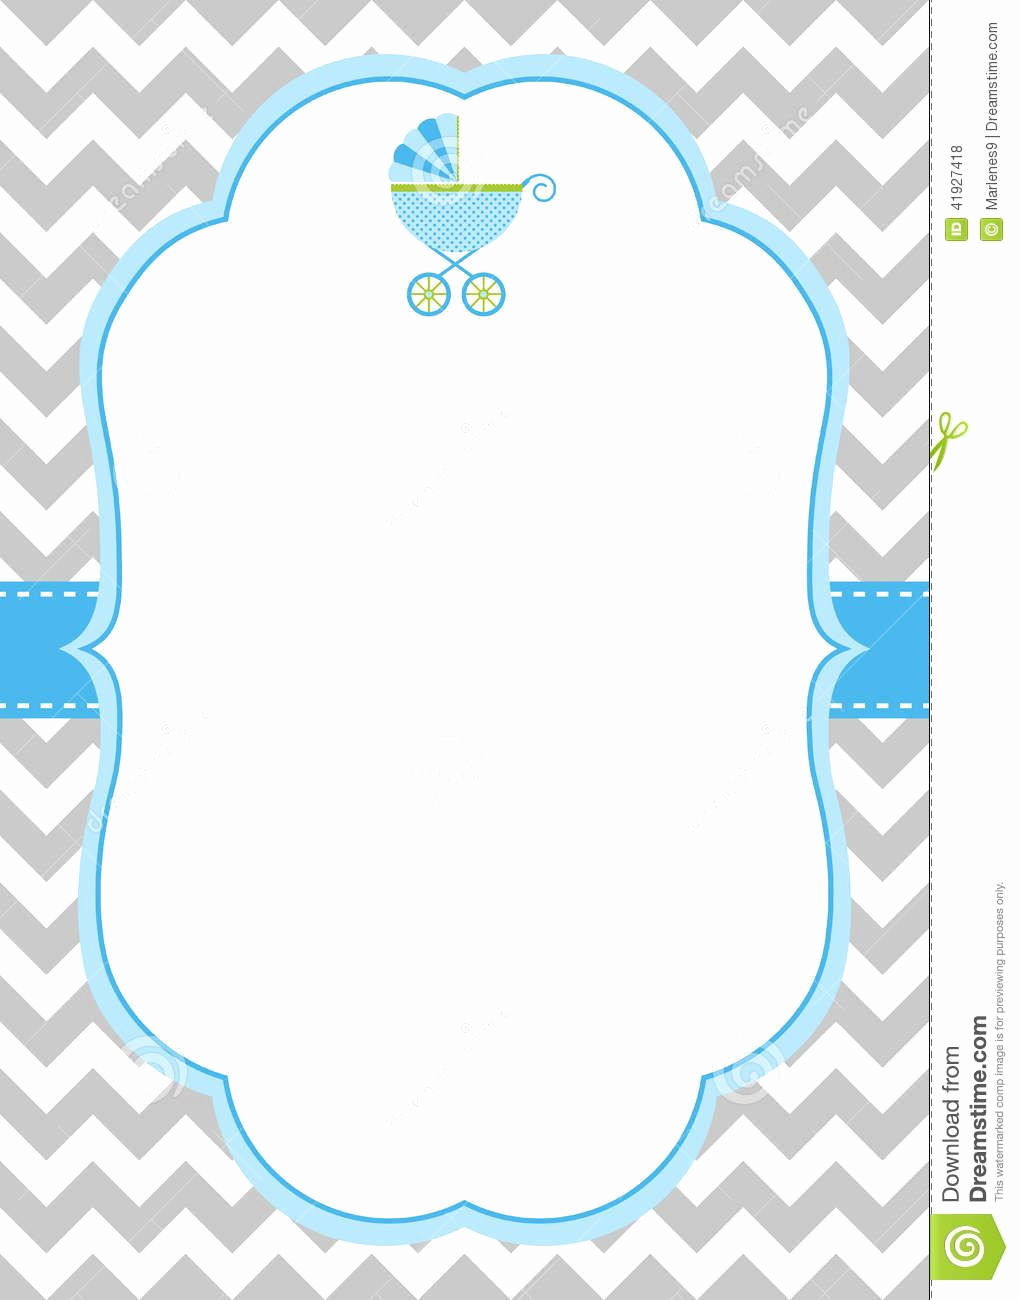 Baby Shower Invitation Border Best Of Template Invitation Spa Birthday Party Invitations Baby